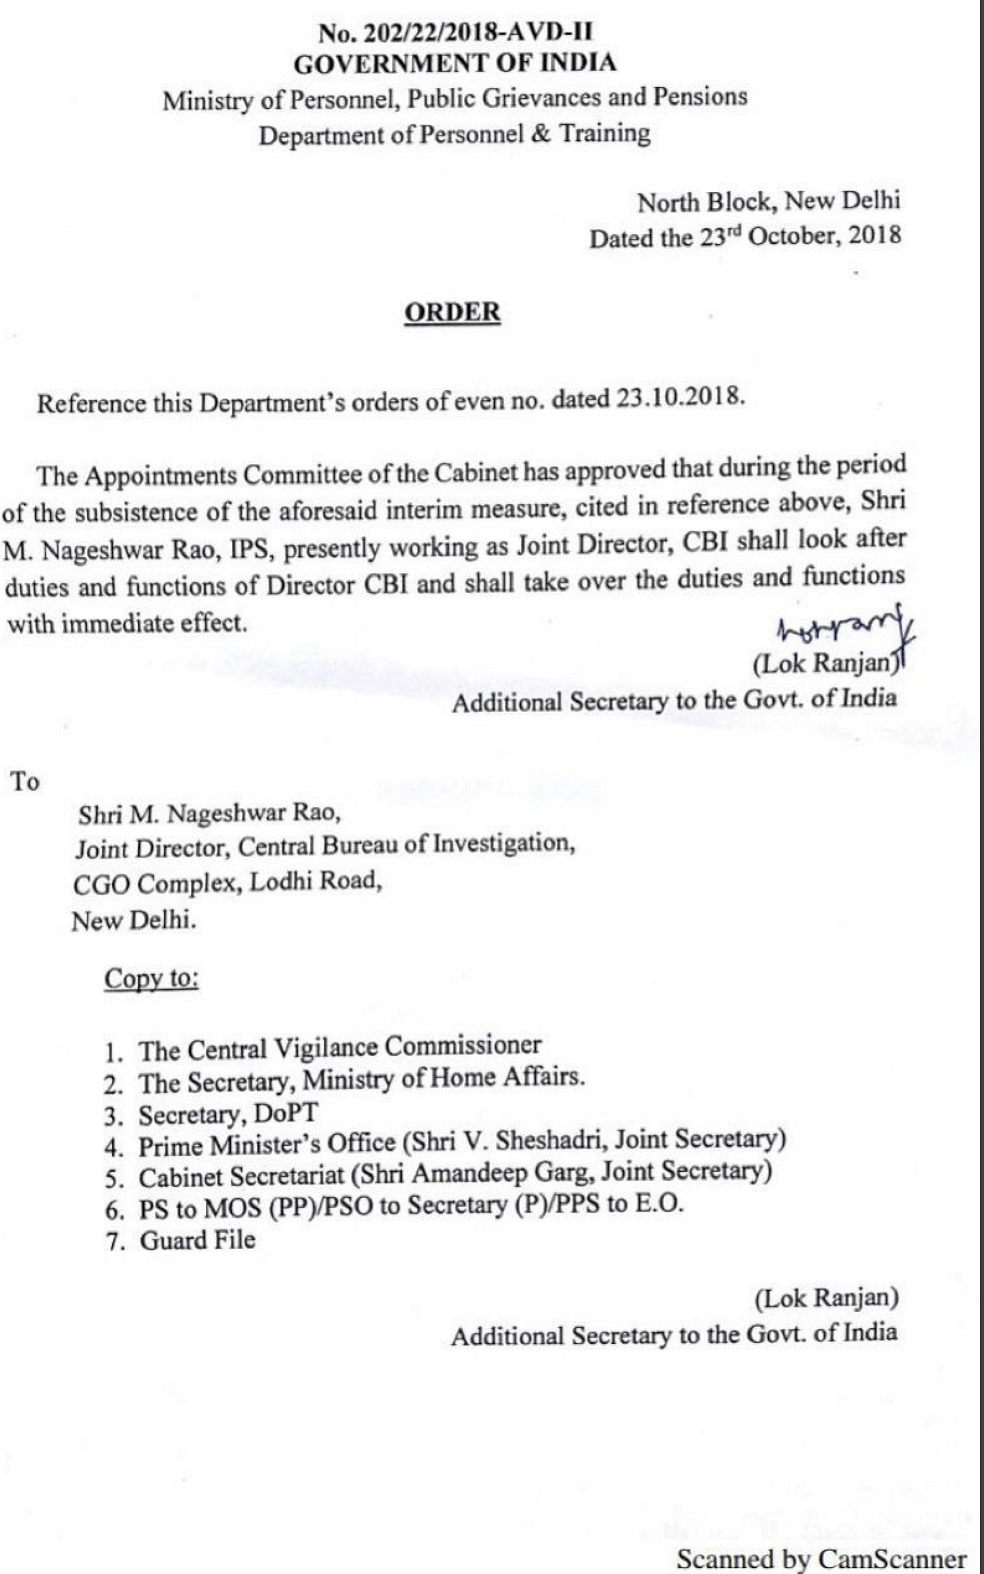 Here’s a primer on the events that unfolded around the CBI controversy, from the midnight order onwards.